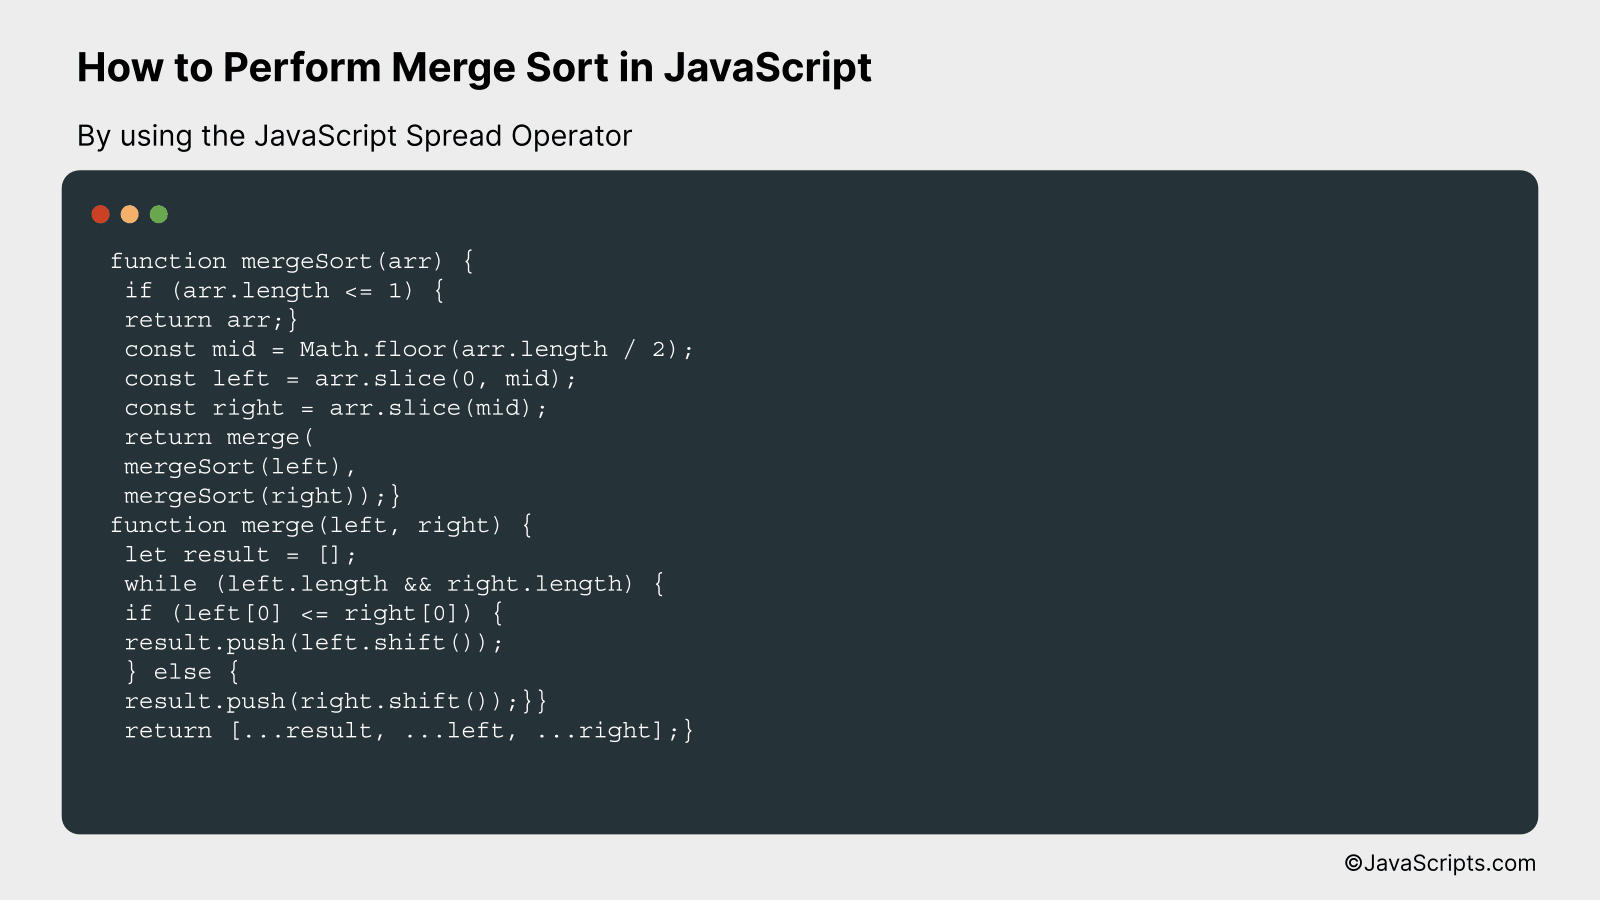 By using the JavaScript Spread Operator